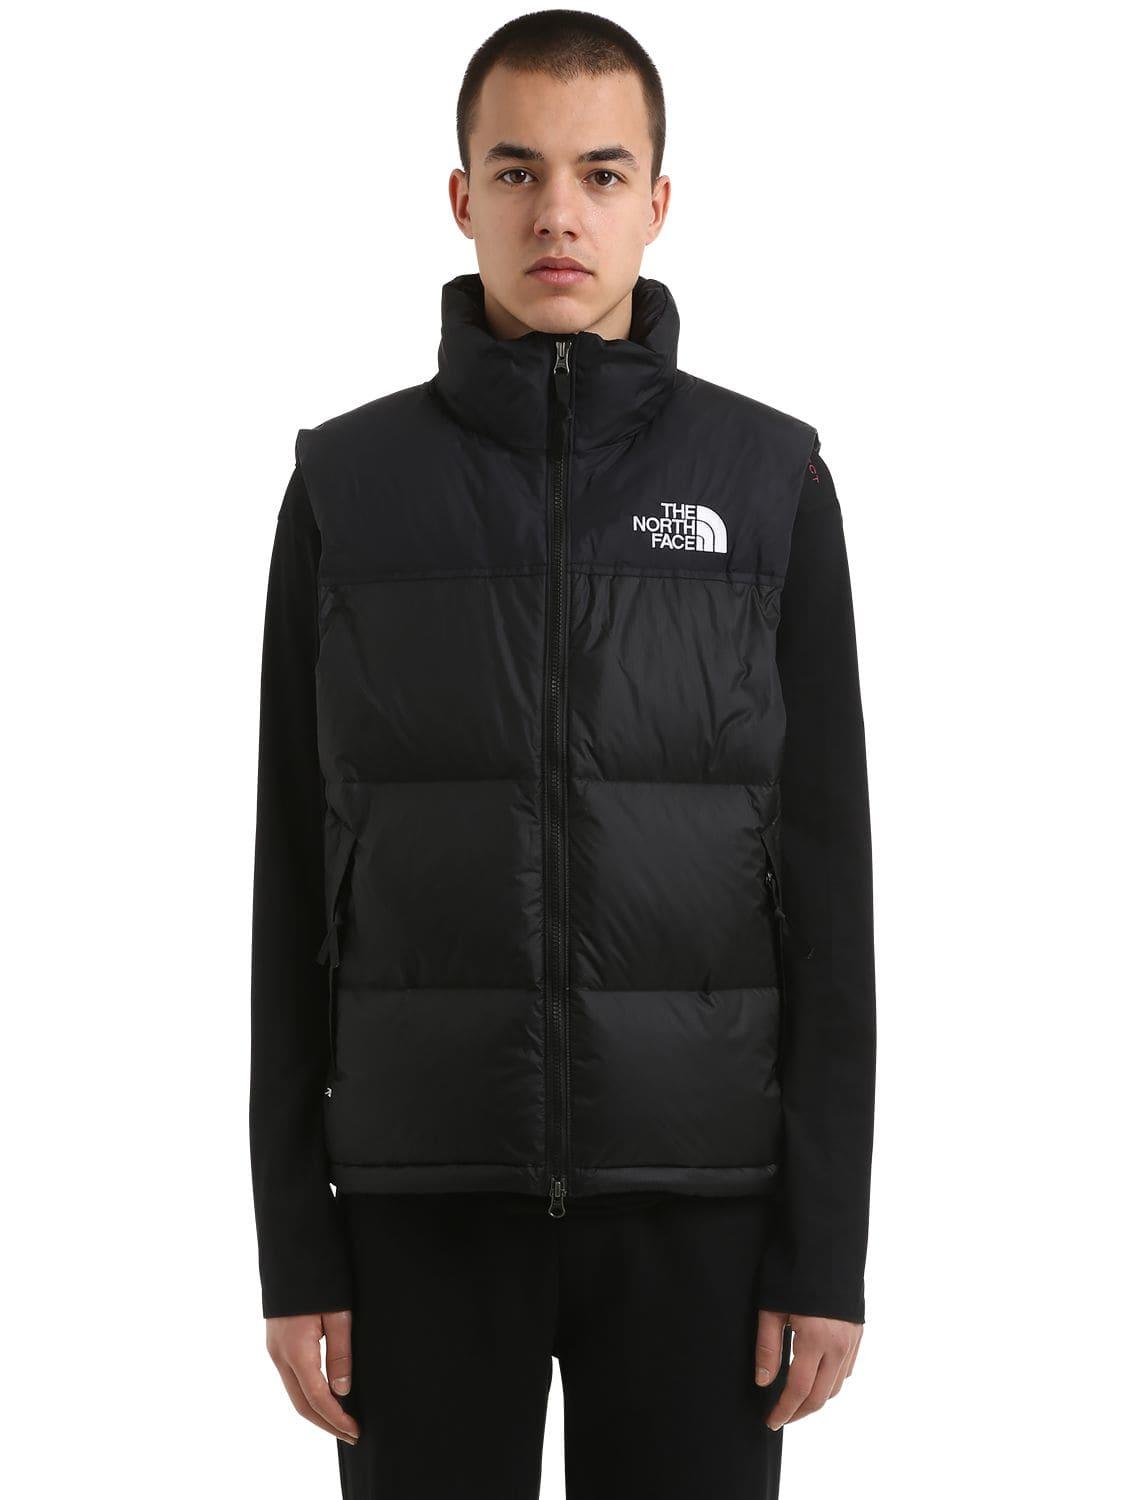 The North Face Synthetic 1996 Retro Nuptse Vest in Black for Men - Lyst